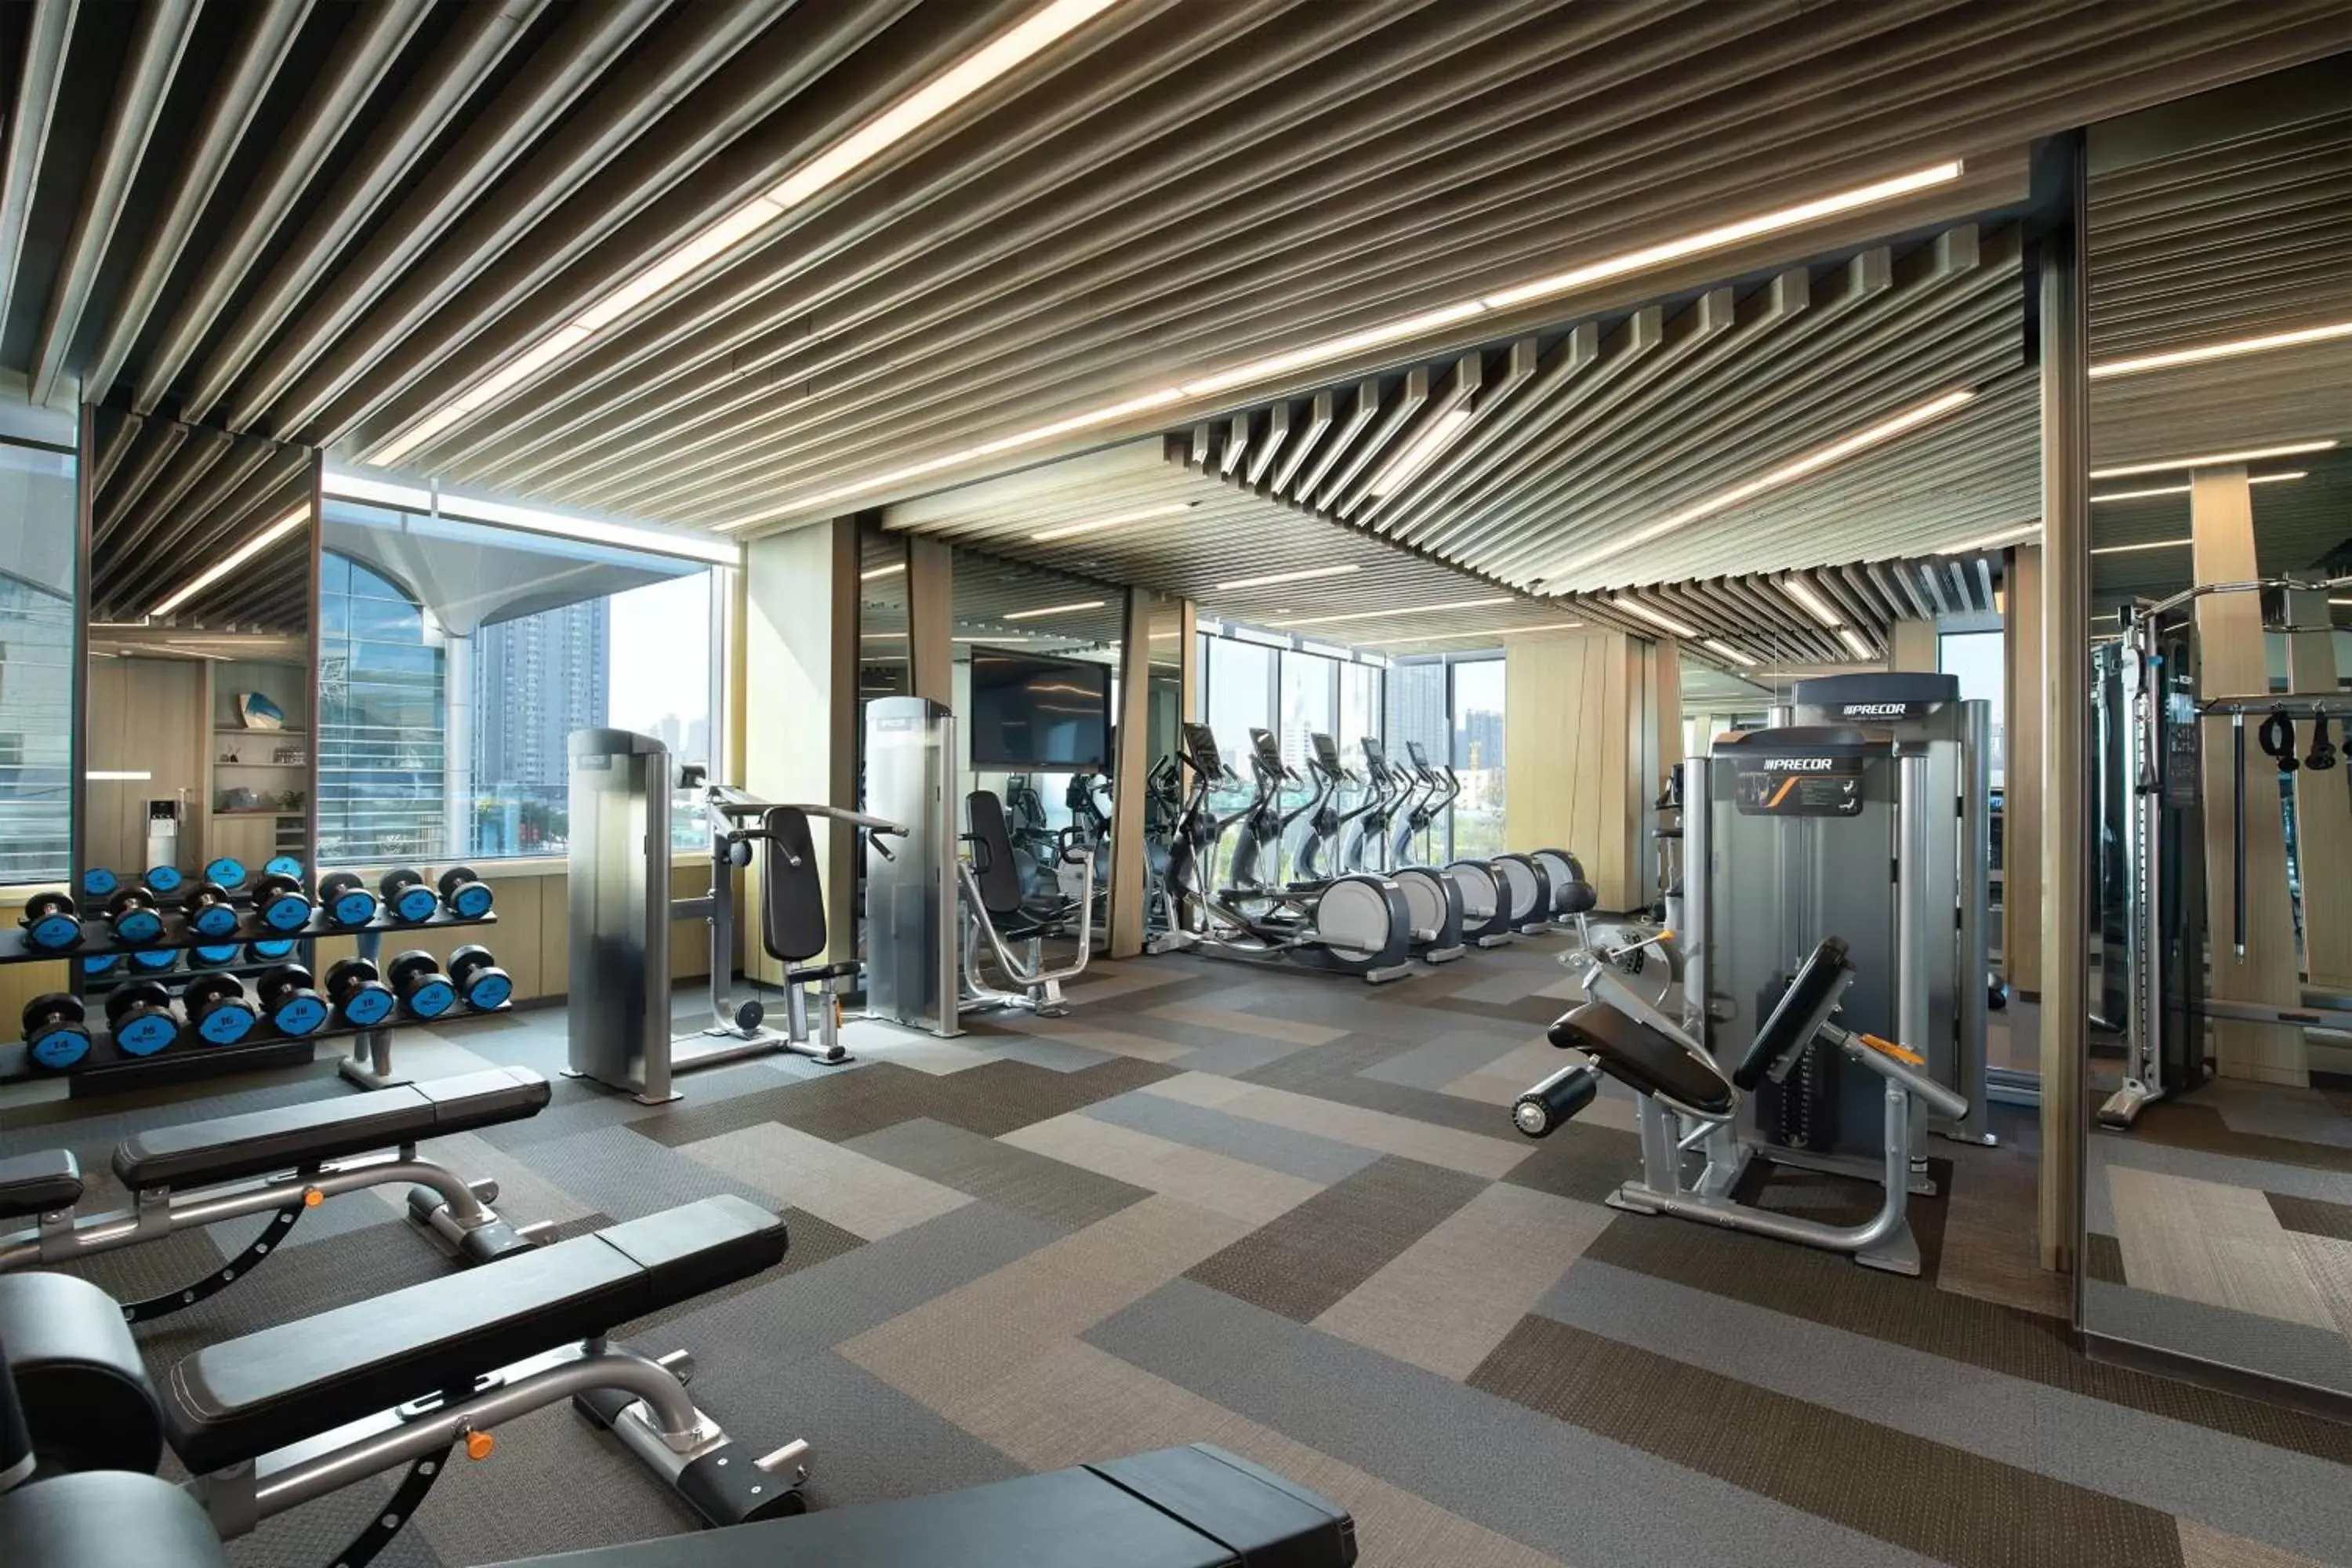 Fitness centre/facilities, Fitness Center/Facilities in Renaissance Xi'an Hotel